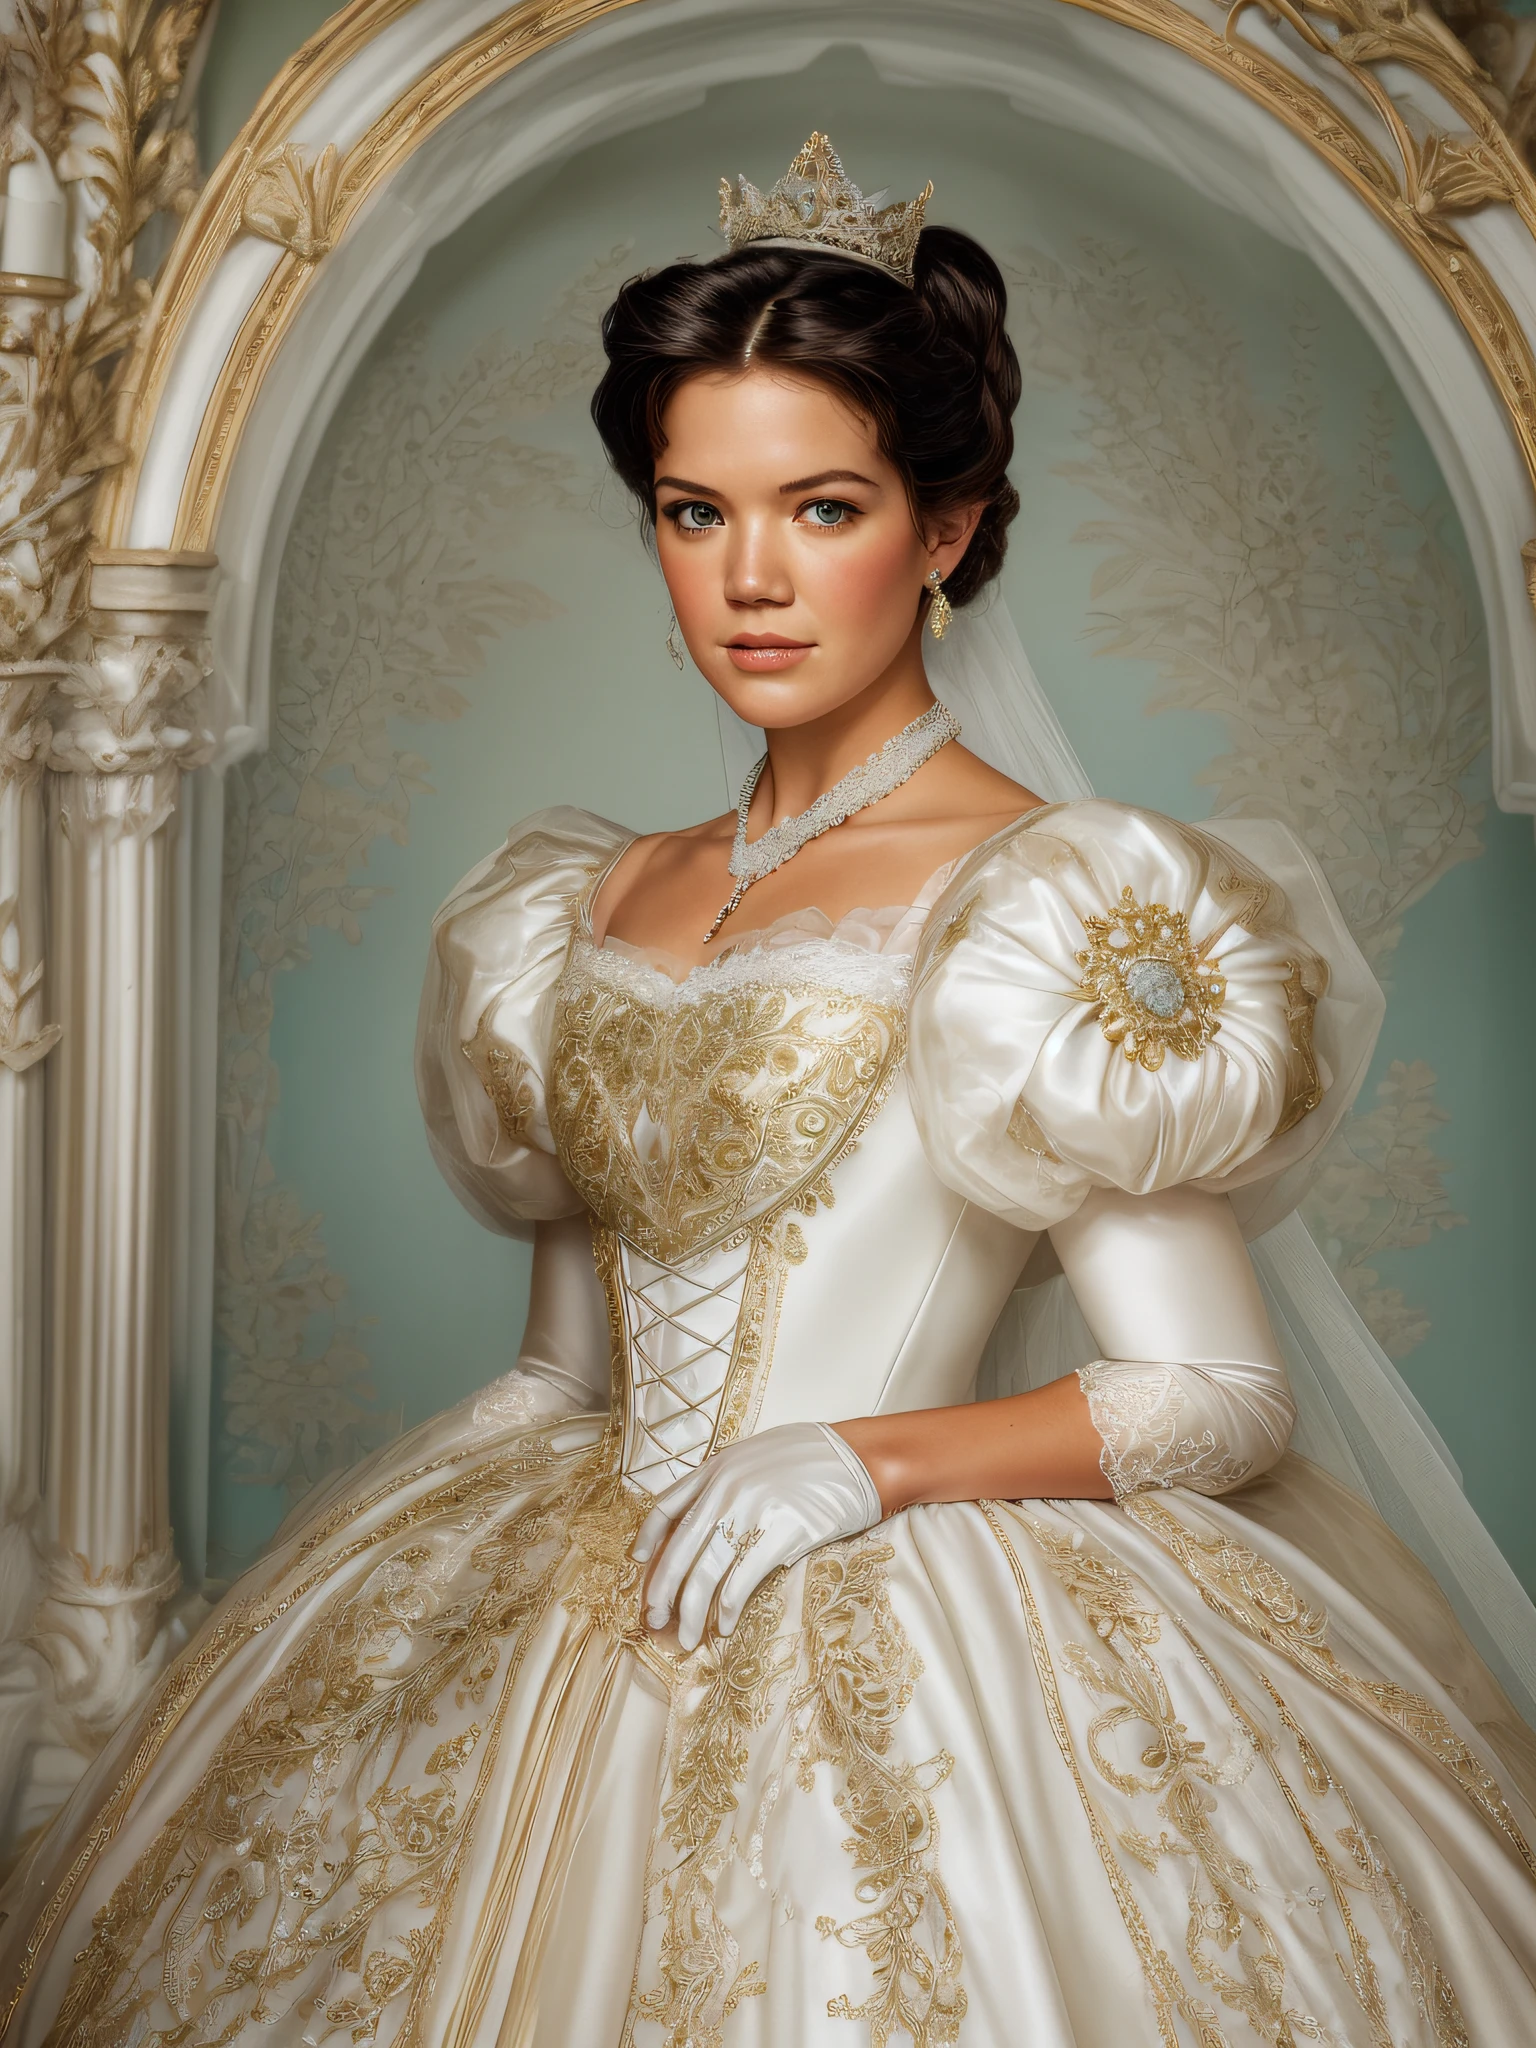 Young Mandy Moore wearing a Stately and Elaborate Royal Cinderella Wedding Dress with an hourglass waist, and a crinoline hoopskirt, adorned with bows, embroidery, and jewels, white gloves, pearls